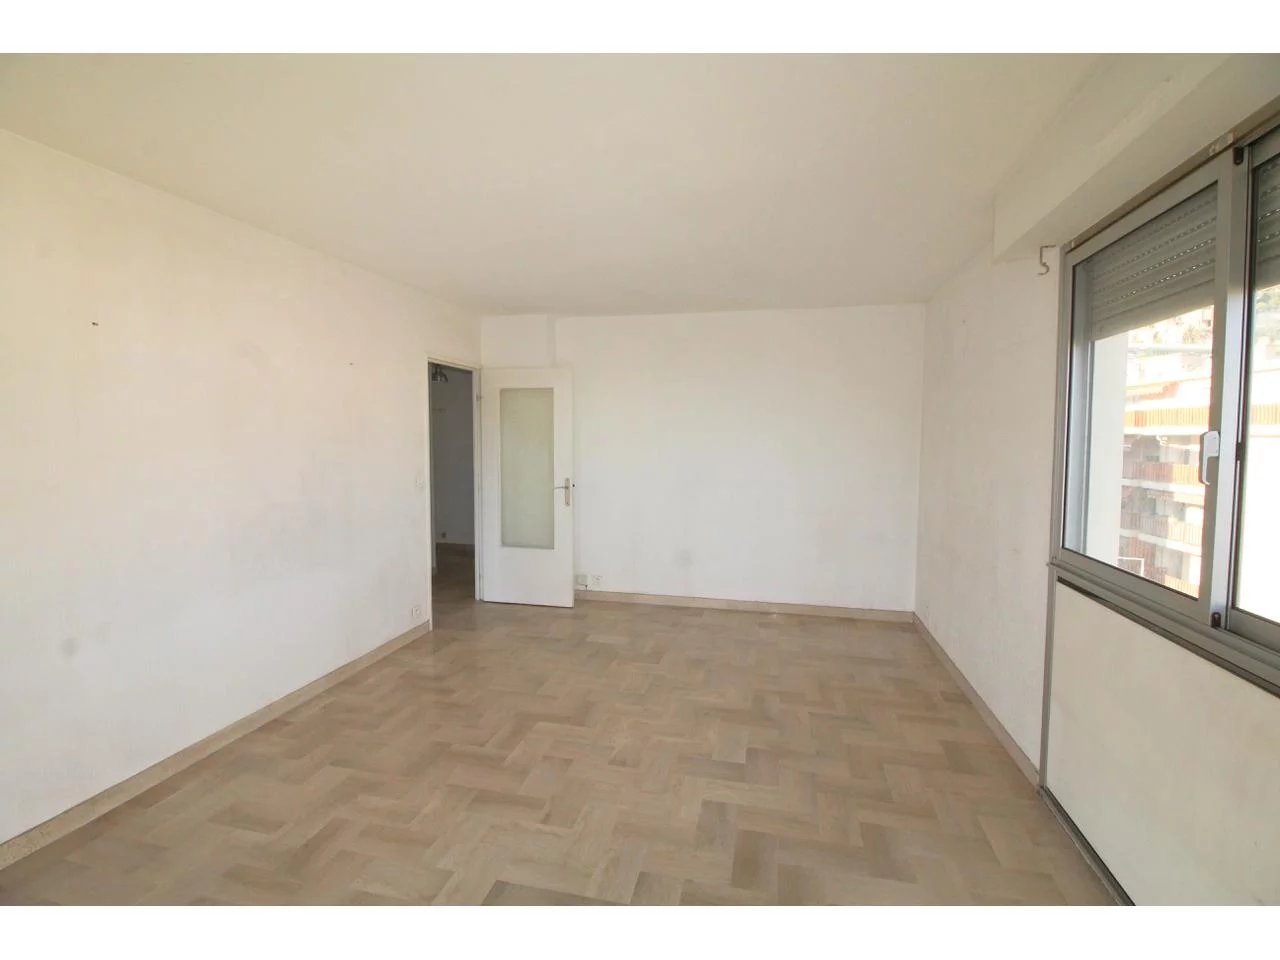 Appartement  2 Rooms 41.55m2  for sale   190 000 €